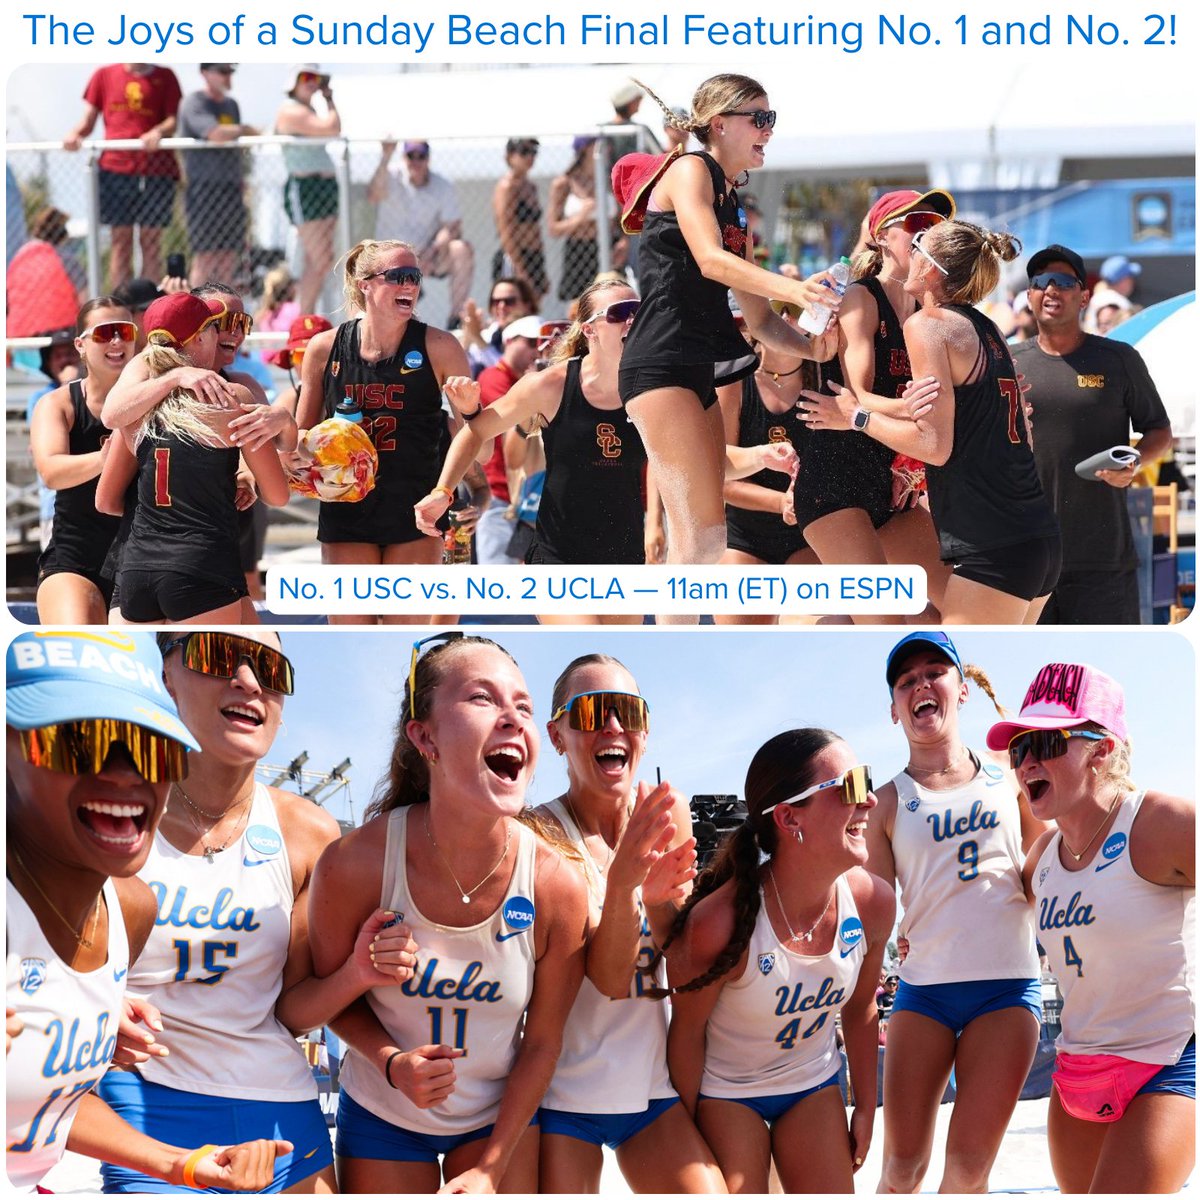 So, we meet again... The 2024 Collegiate Beach Championship comes down to No.1 @USCBeach & No.2 @UCLABeachVB, as the crosstown rivals battle for the title. The teams split their 6 matches this season and the tiebreaker, which starts at 11am(ET) on ESPN, should be epic! #WeAreAVCA